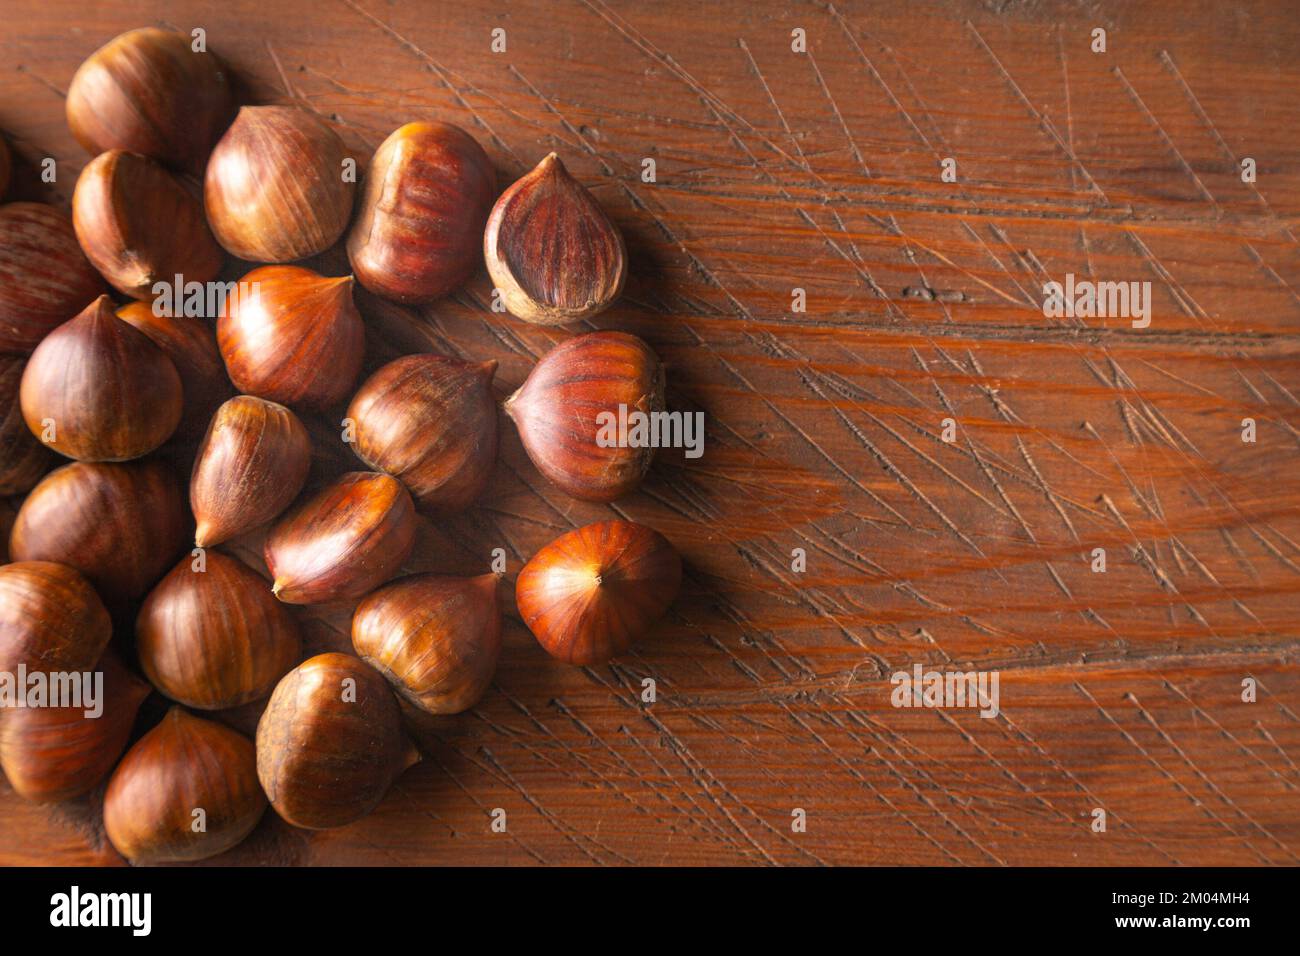 Chestnuts on a flat surface Stock Photo